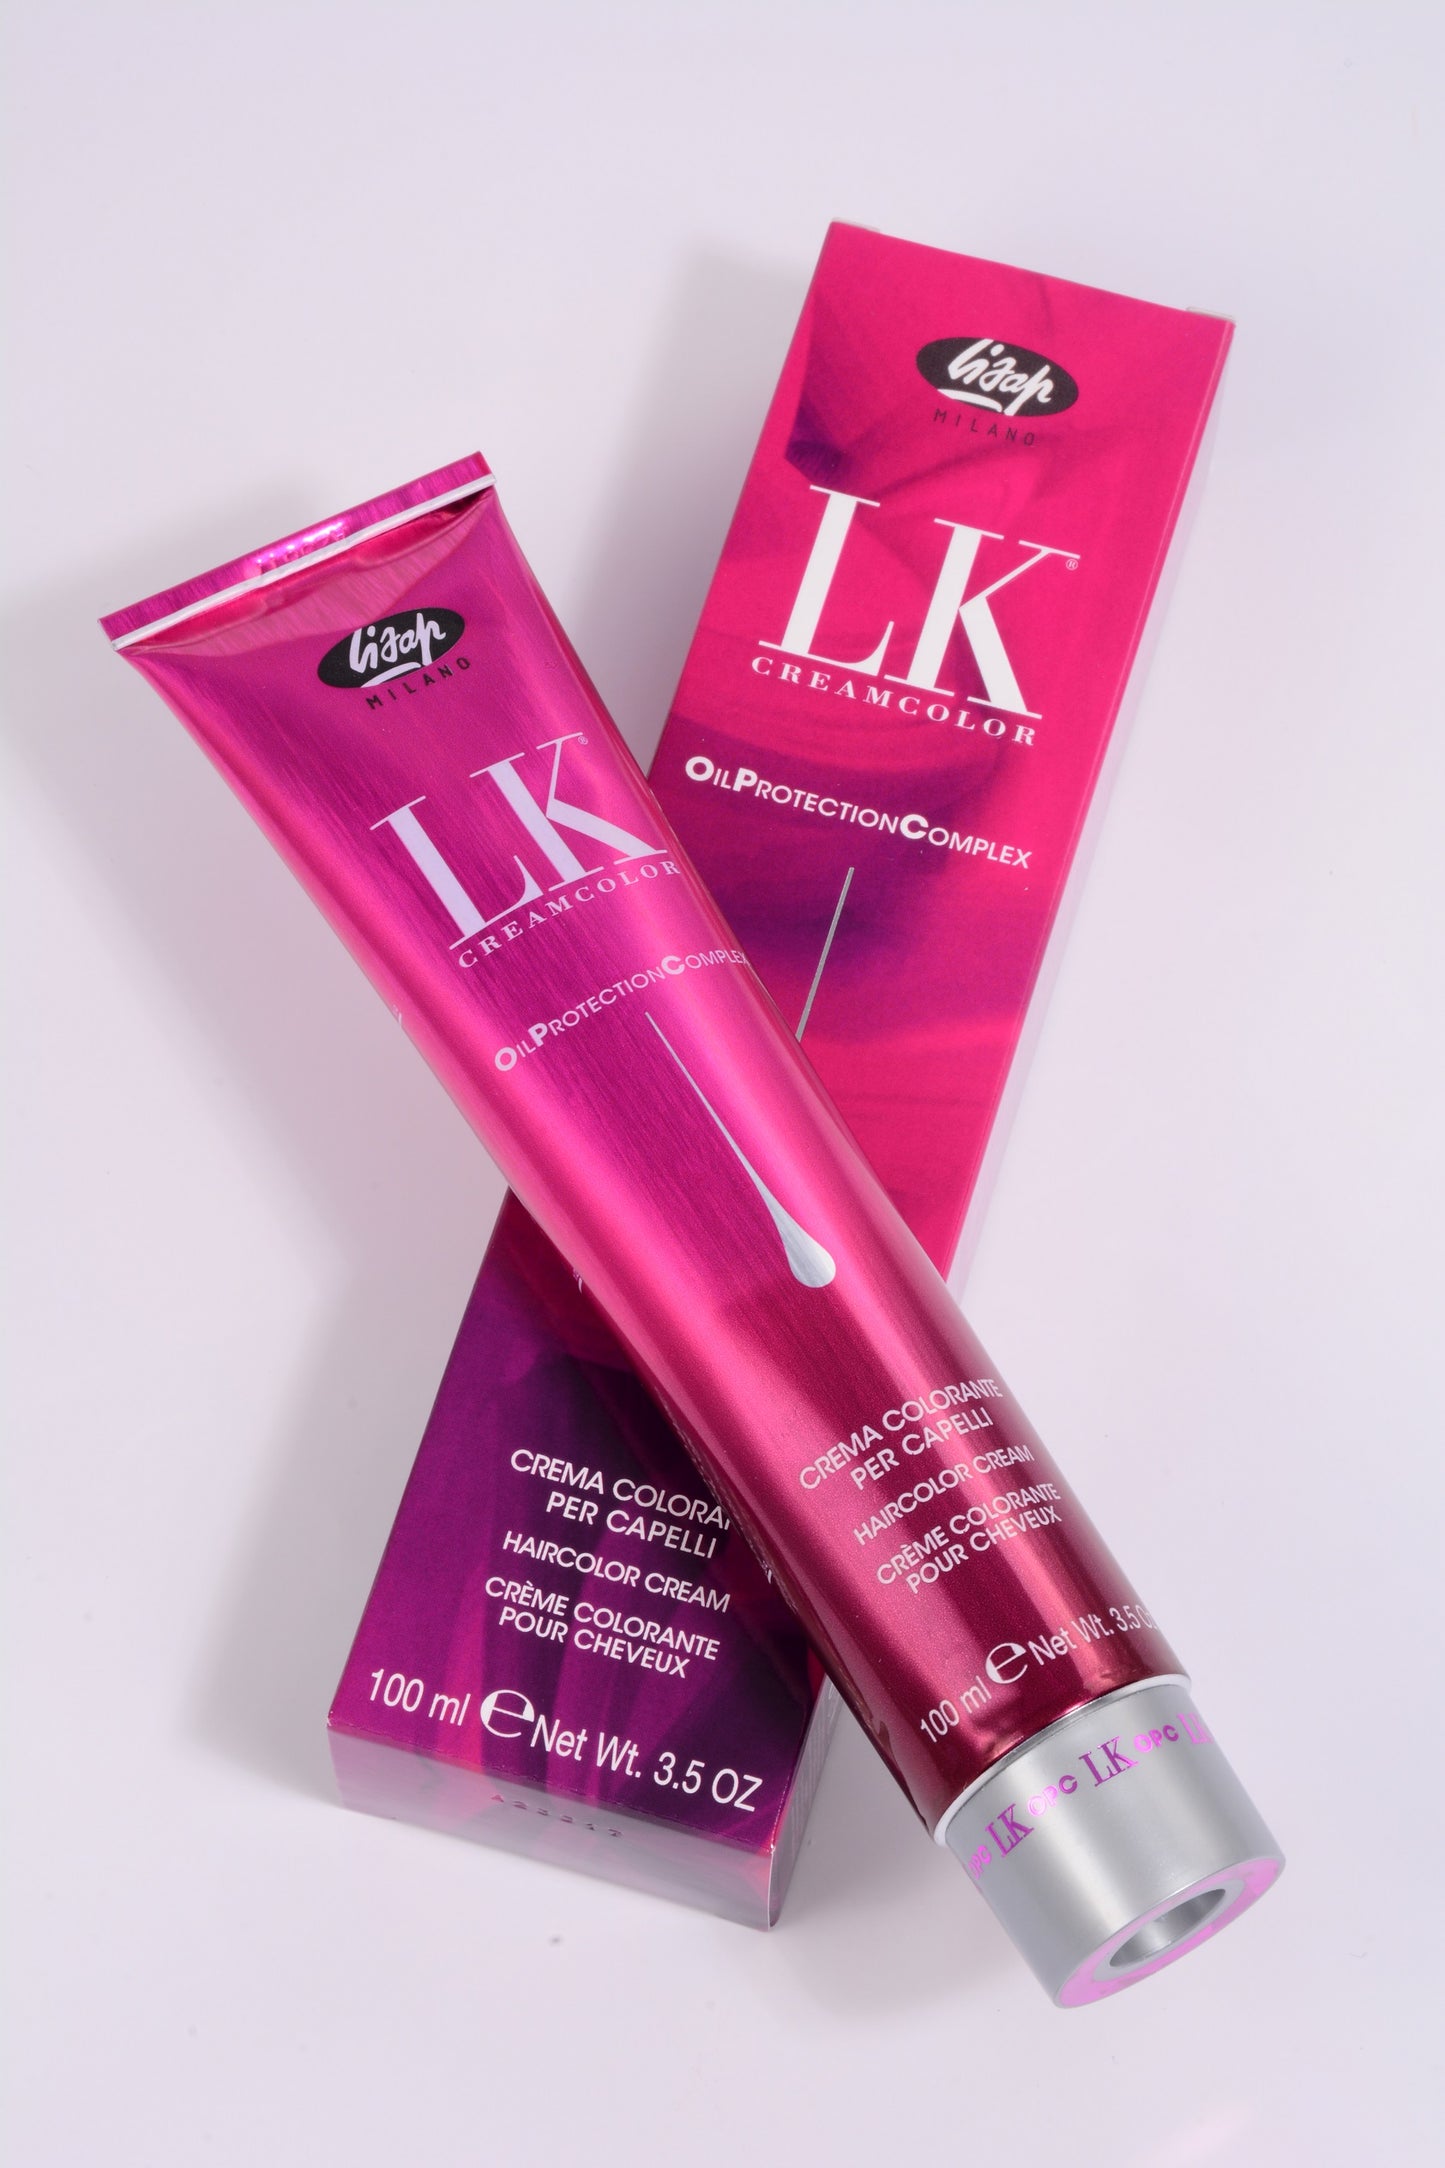 LK Creamcolor 1/01 Oil Protection Complex